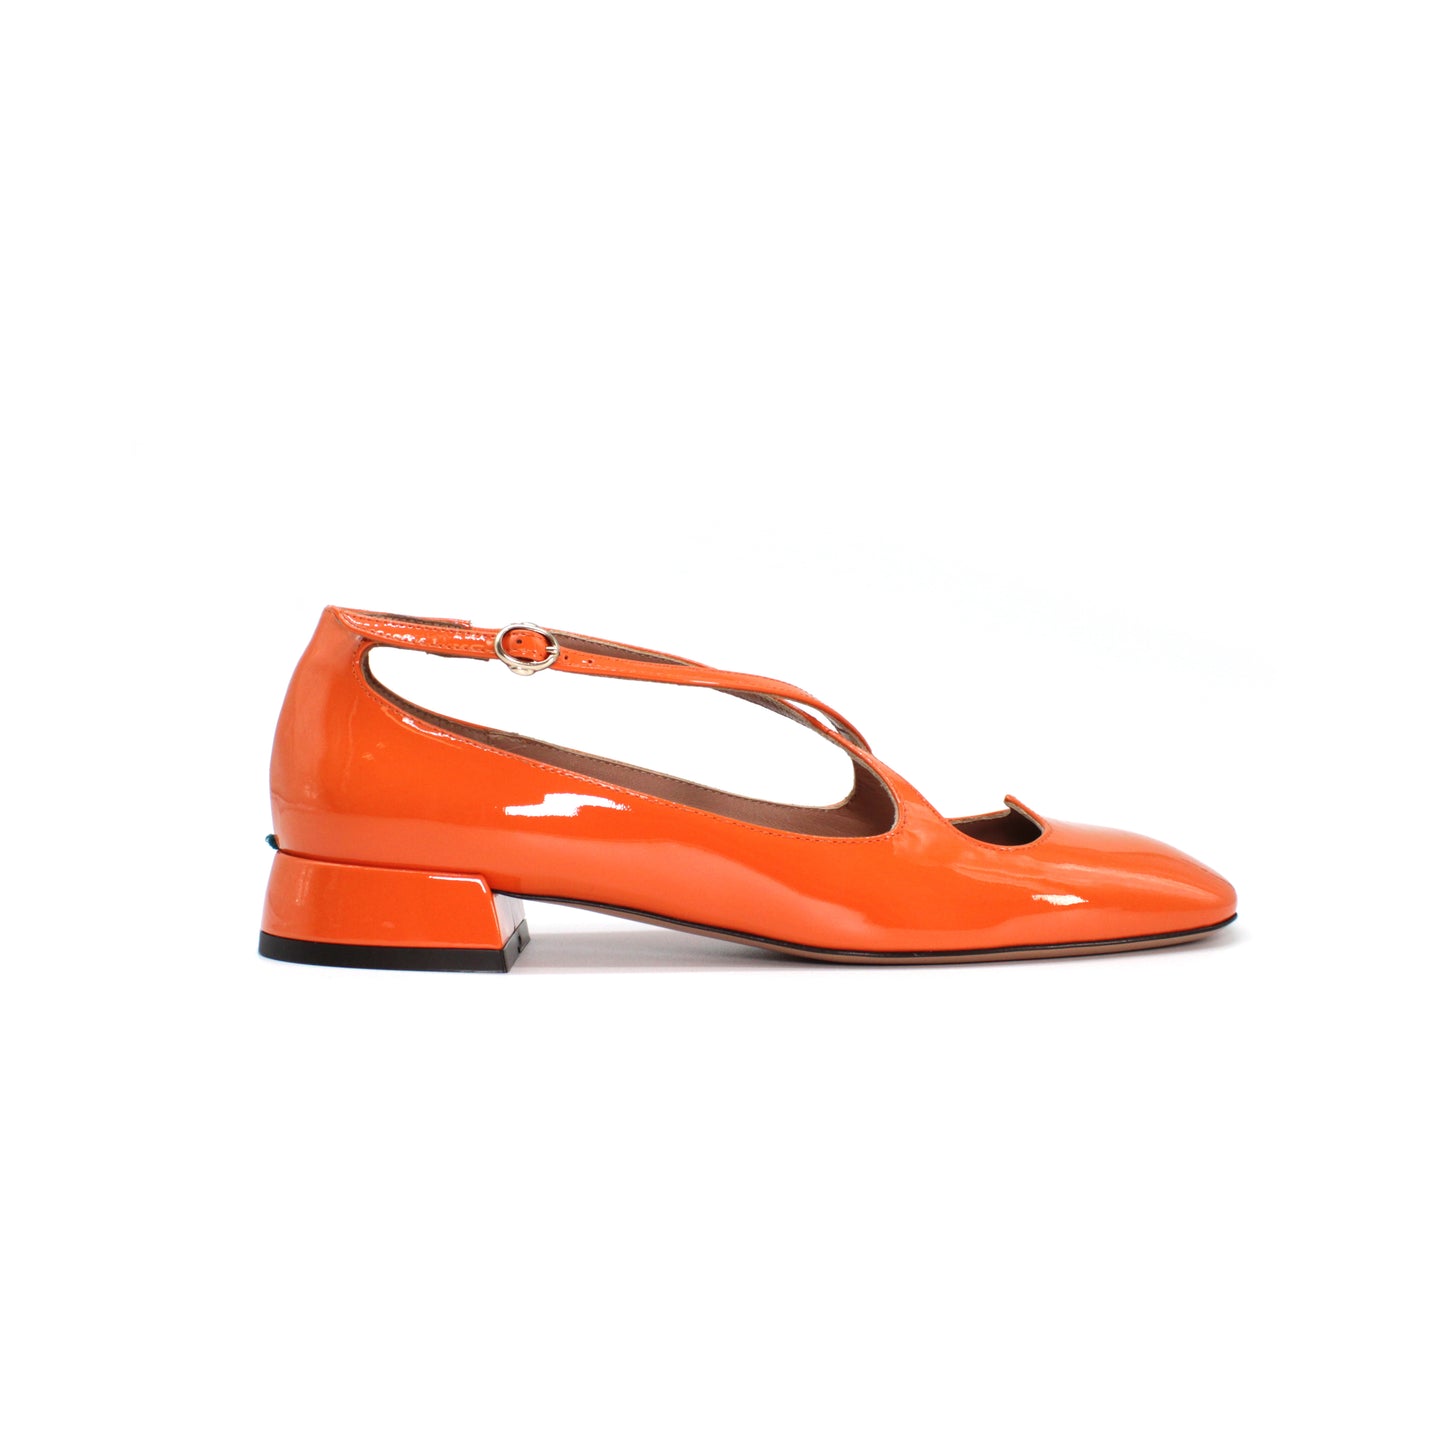 Pump Two for Love in tangerine patent leather - Second life